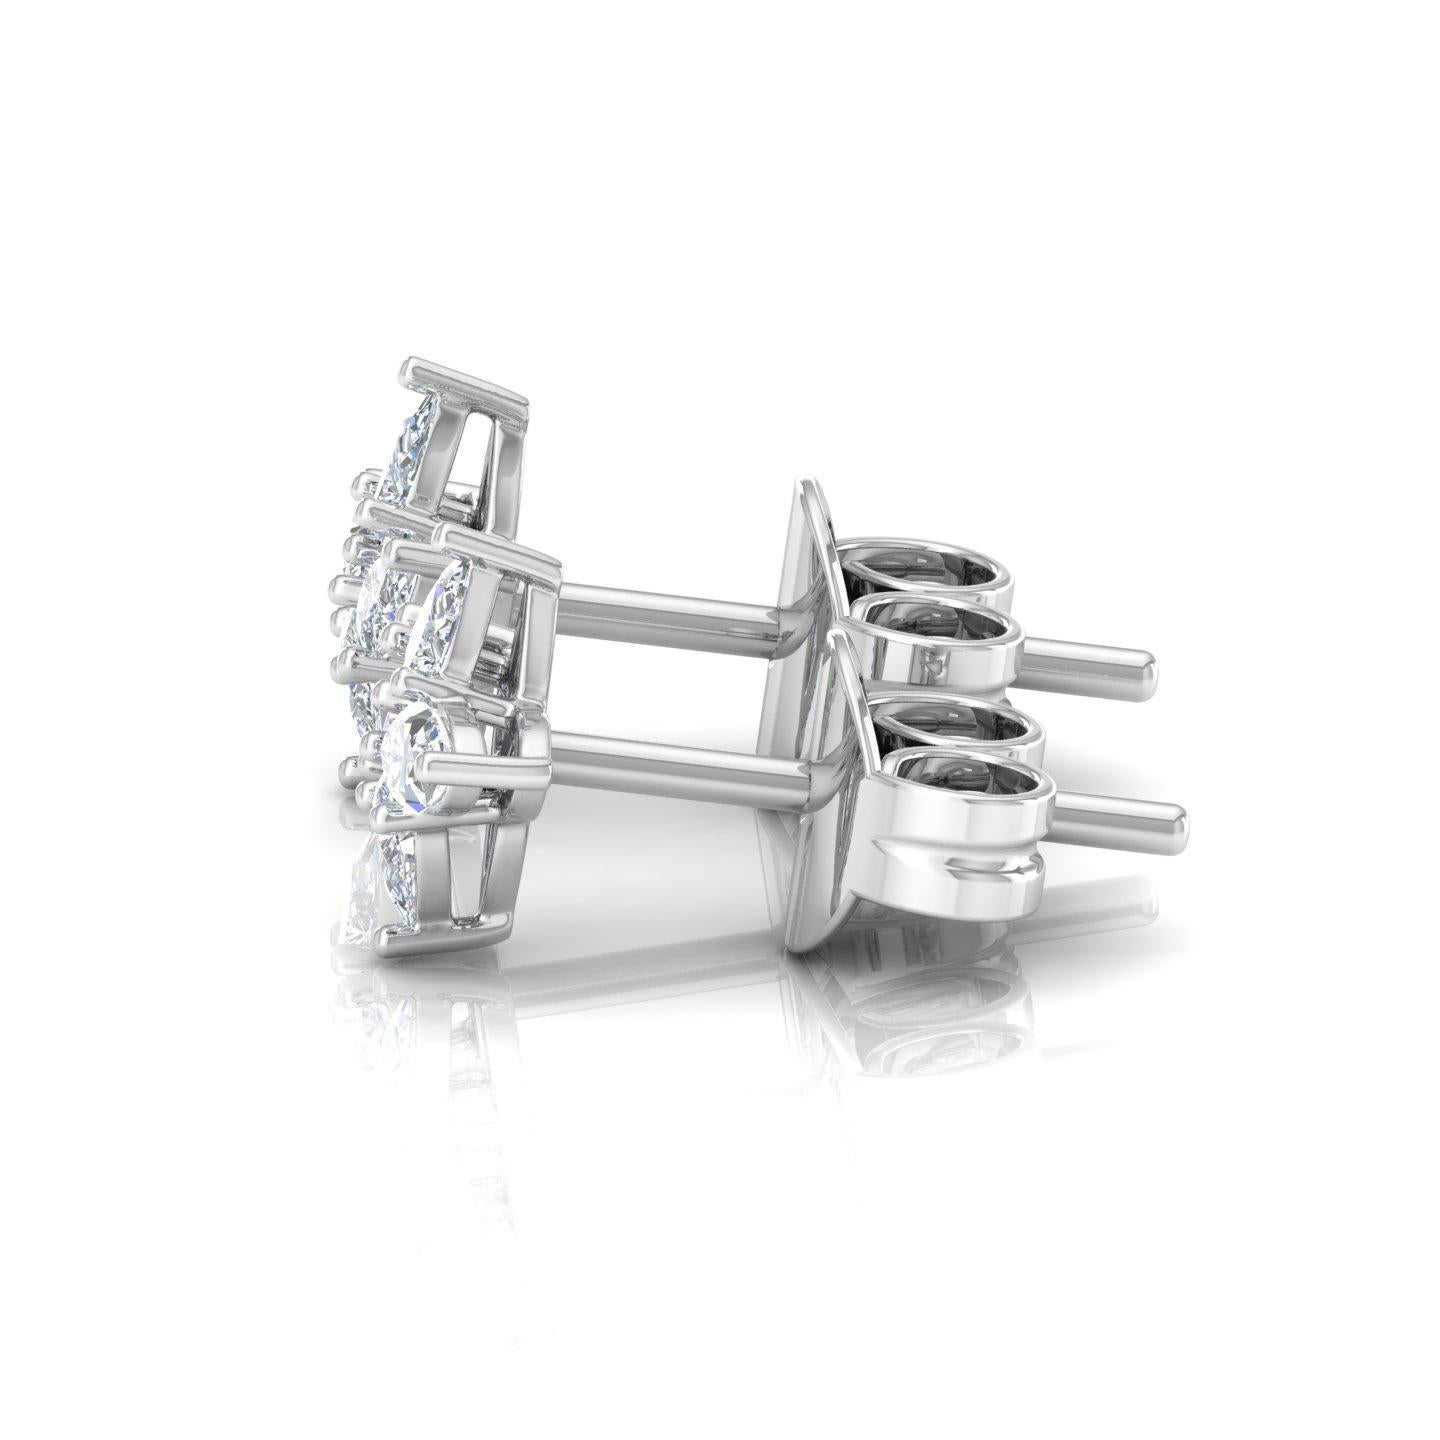 These exquisite stud earrings are meticulously handcrafted from 18-karat white gold and feature pear and marquise-cut diamonds. The combination of these diamond shapes creates a captivating and unique design that is sure to catch attention. The